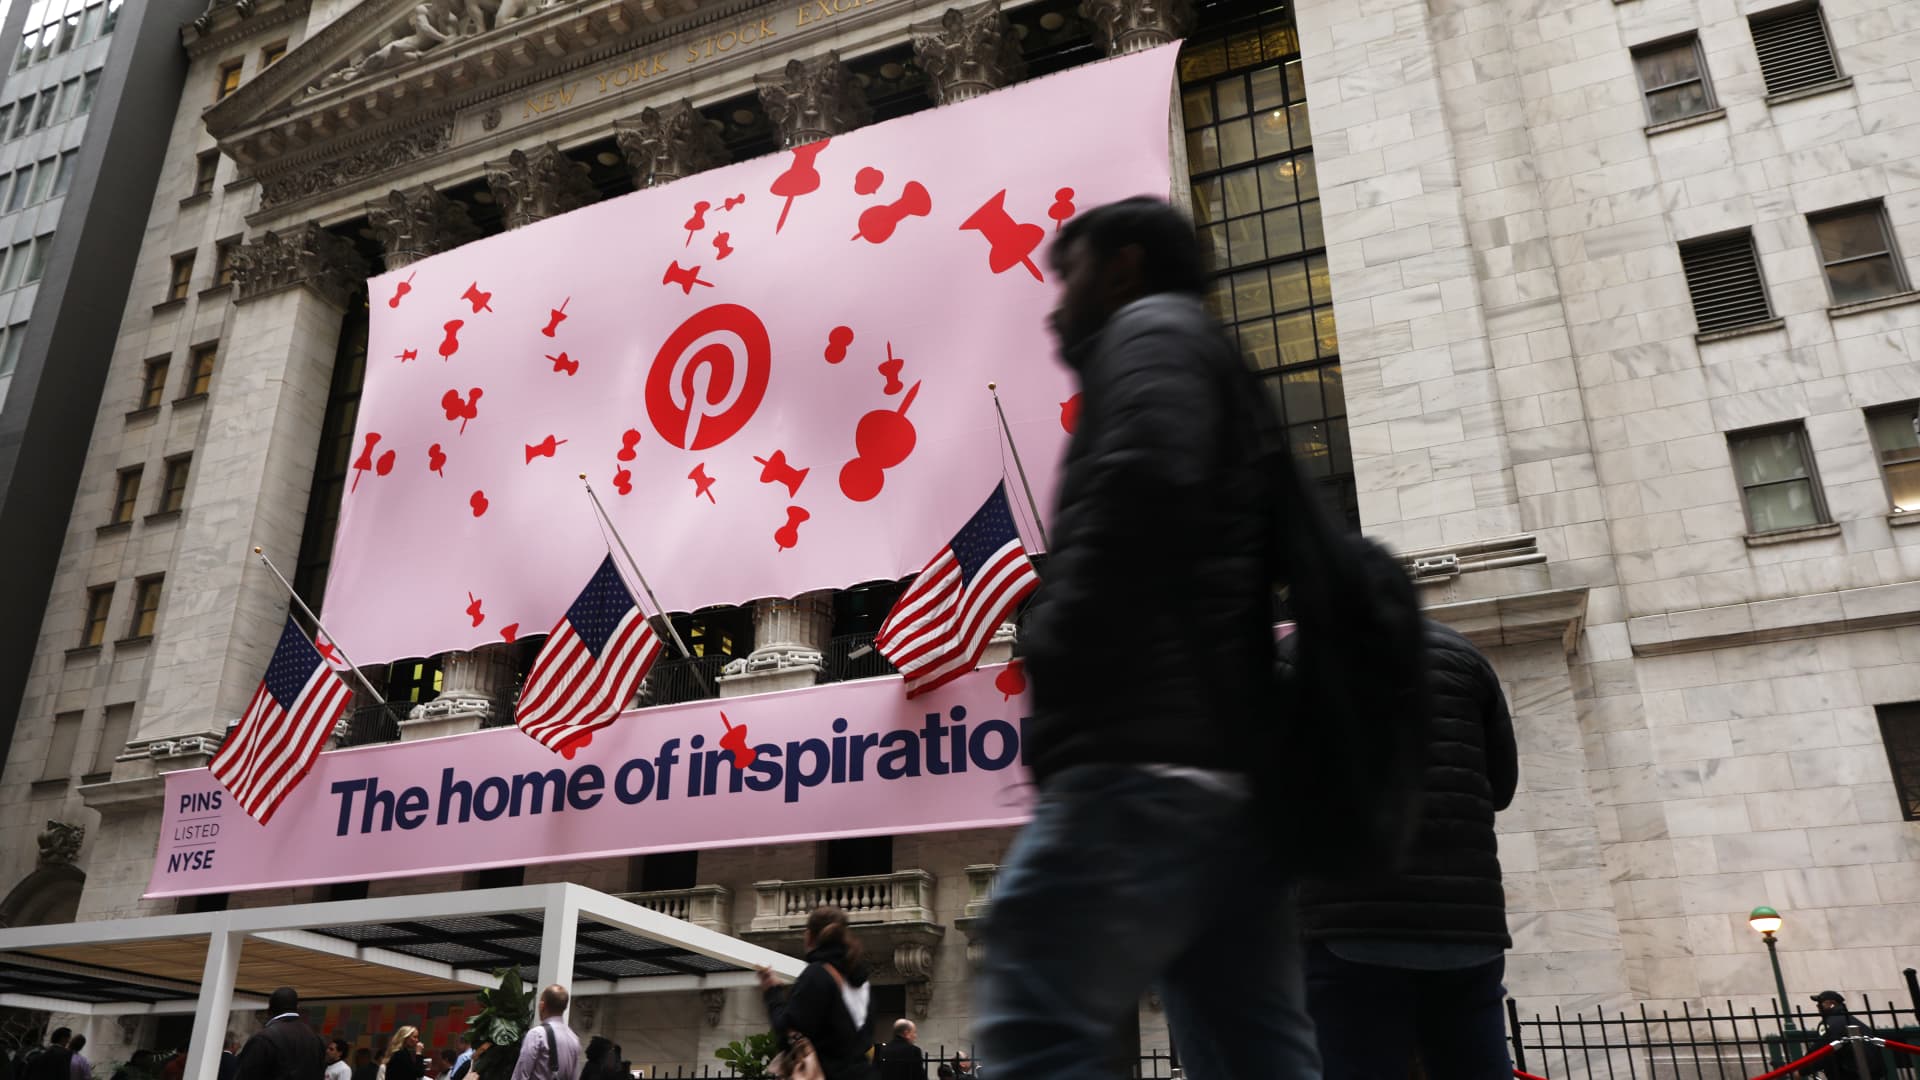 A banner for the online image board Pinterest Inc. hangs from the New York Stock Exchange on the morning that Pinterest makes its initial public offering on April 18, 2019.